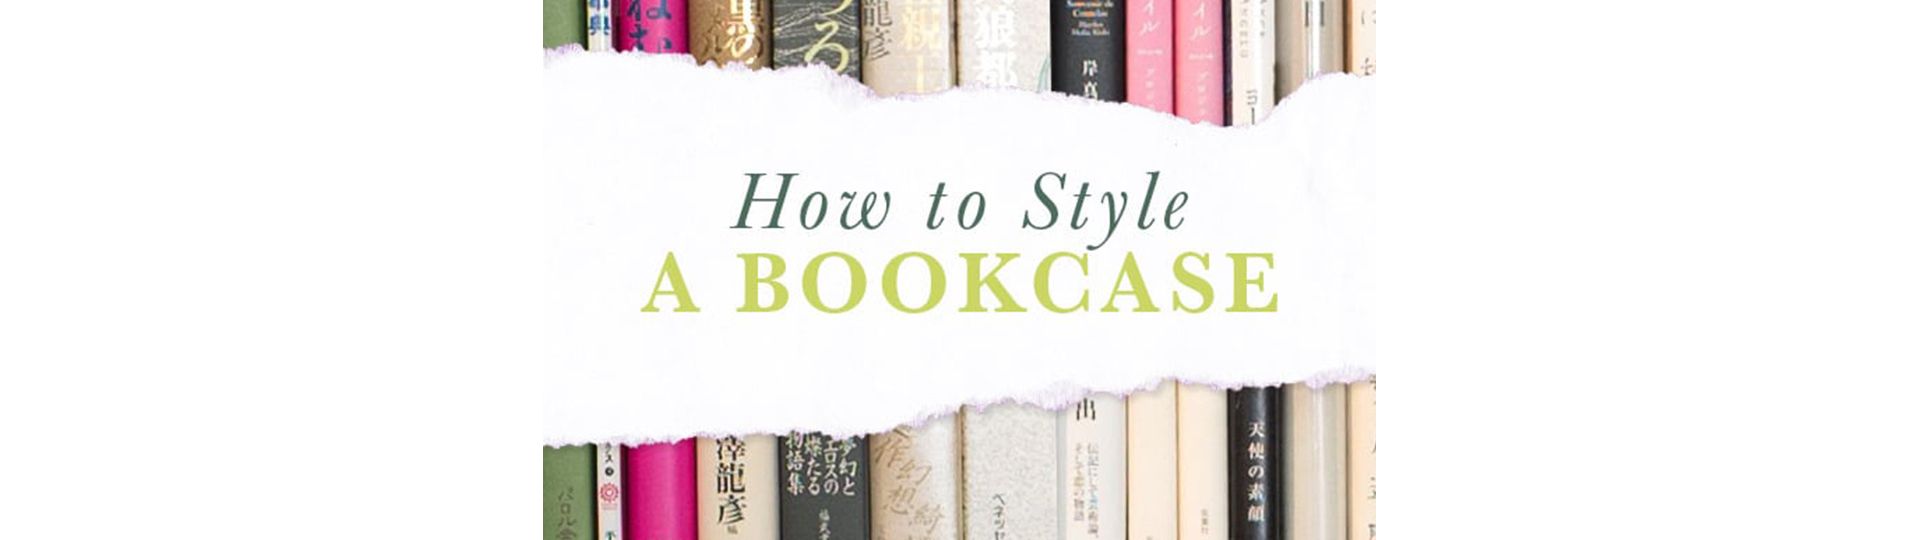 How to Style a Bookcase Image